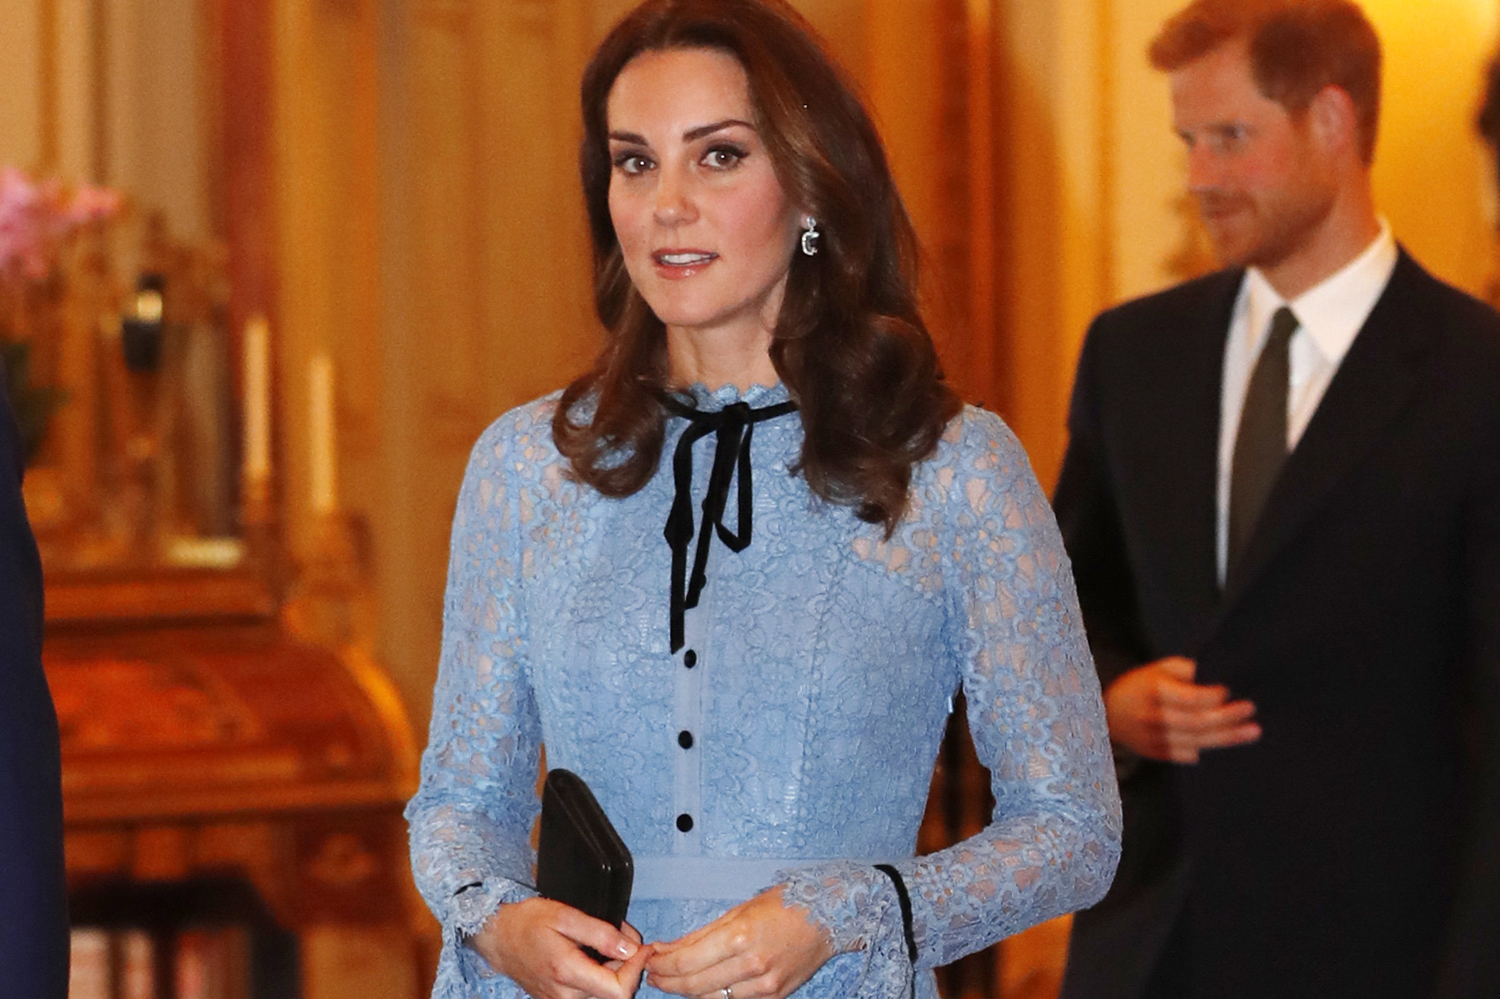 Kate Middleton Just Stepped Out For The First Time Since Announcing Her Pregnancy